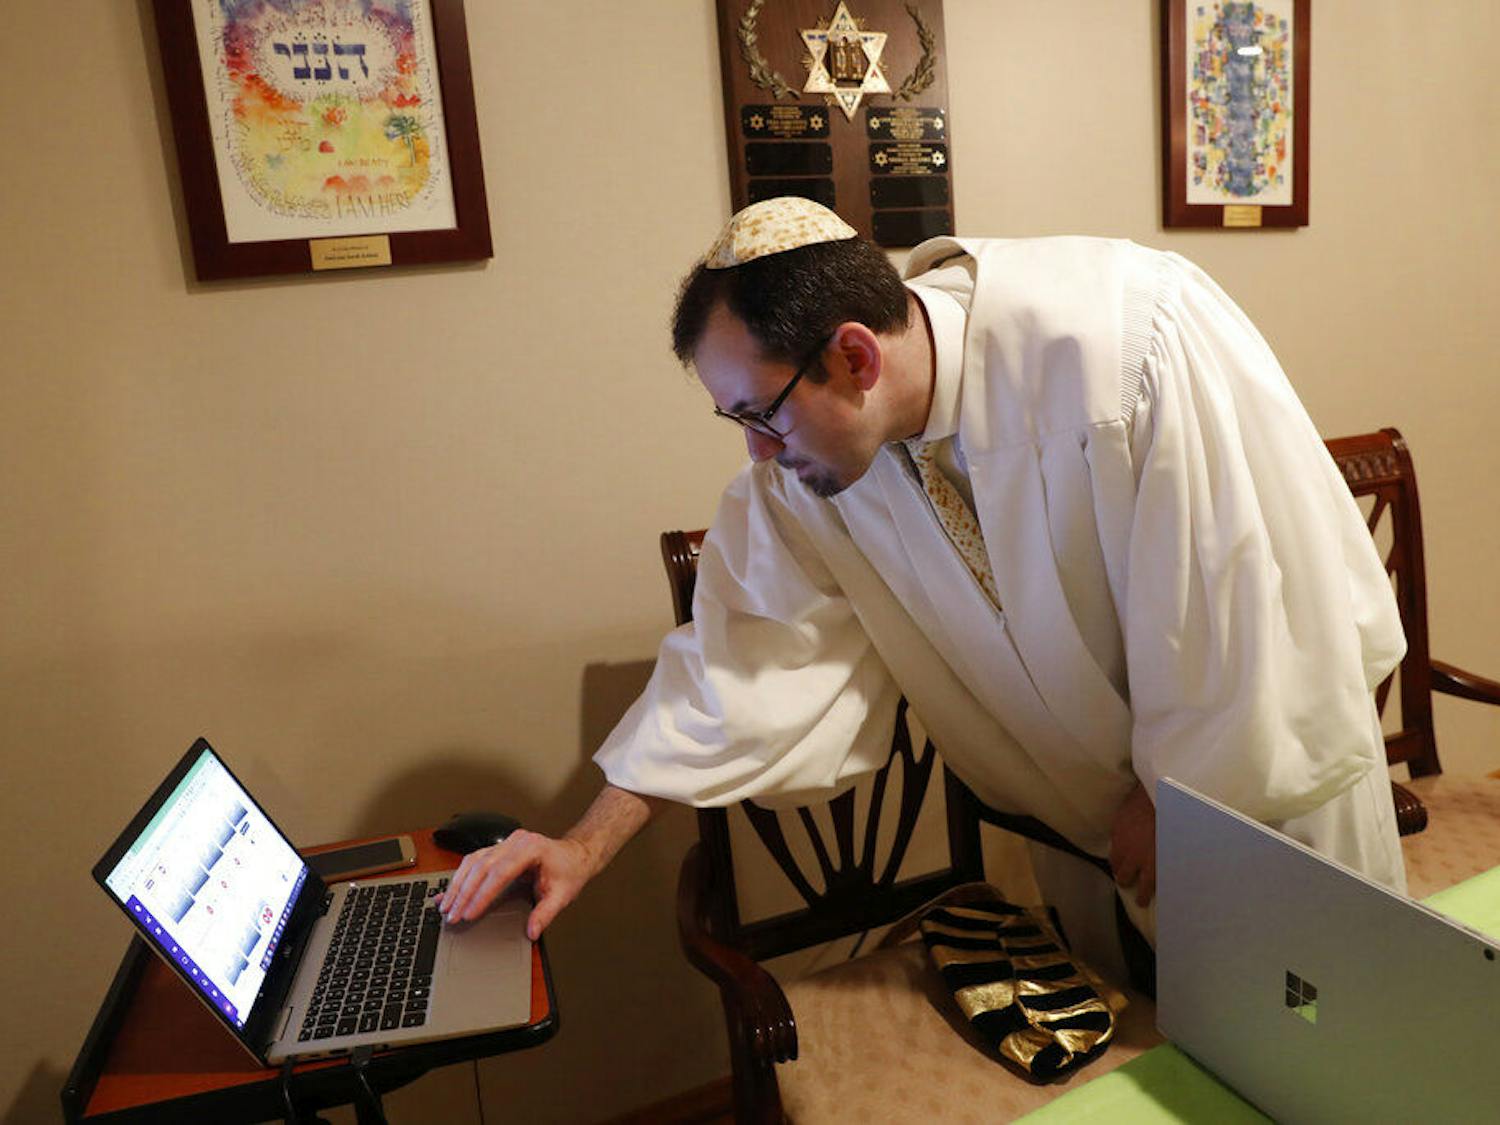 Rabbi Shlomo Segal of Kehilat Moshe synagogue checks to see who has dialed in to his virtual Passover seder in the Sheepshead Bay section of Brooklyn during the current coronavirus outbreak, Wednesday, April 8, 2020, in New York. Segal said some 55 congregants, friends and family members dialed into the tele-conferenced experience, which was also simulataneously broadcast live on YouTube on the other laptop, right. The new coronavirus causes mild or moderate symptoms for most people, but for some, especially older adults and people with existing health problems, it can cause more severe illness or death. (AP Photo/Kathy Willens)